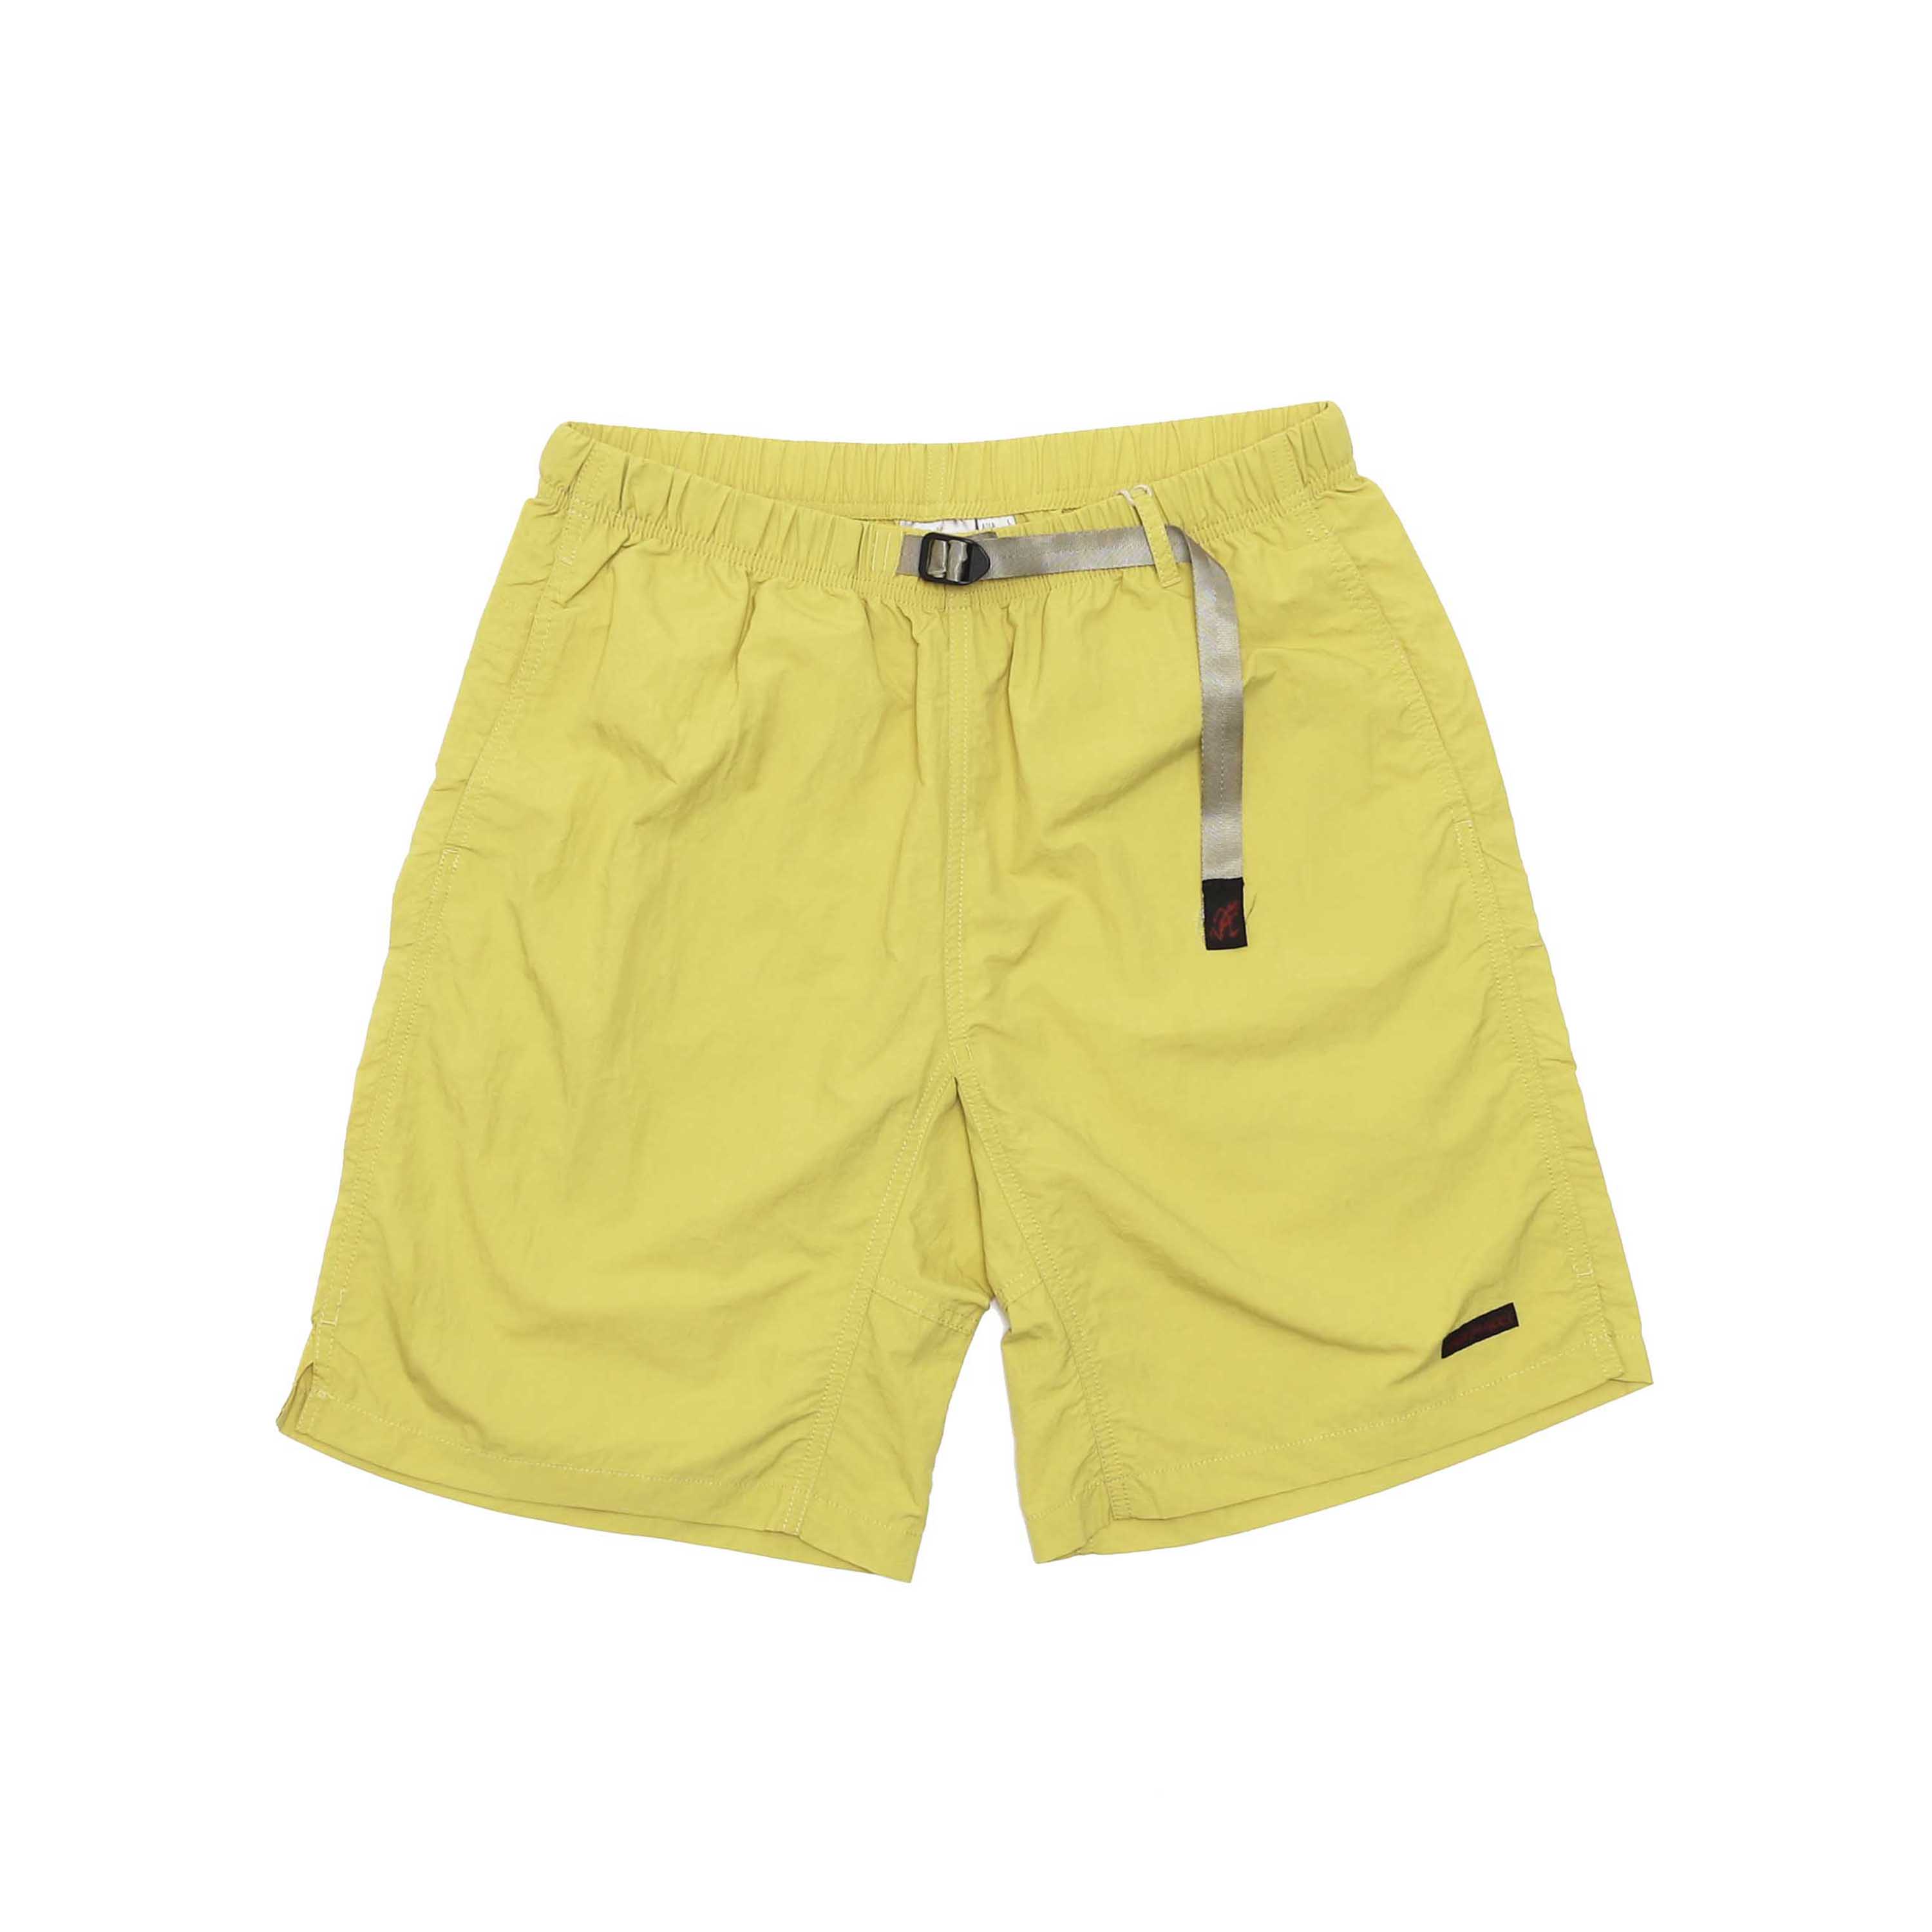 NYLON PACKABLE G SHORT - CANARY YELLOW